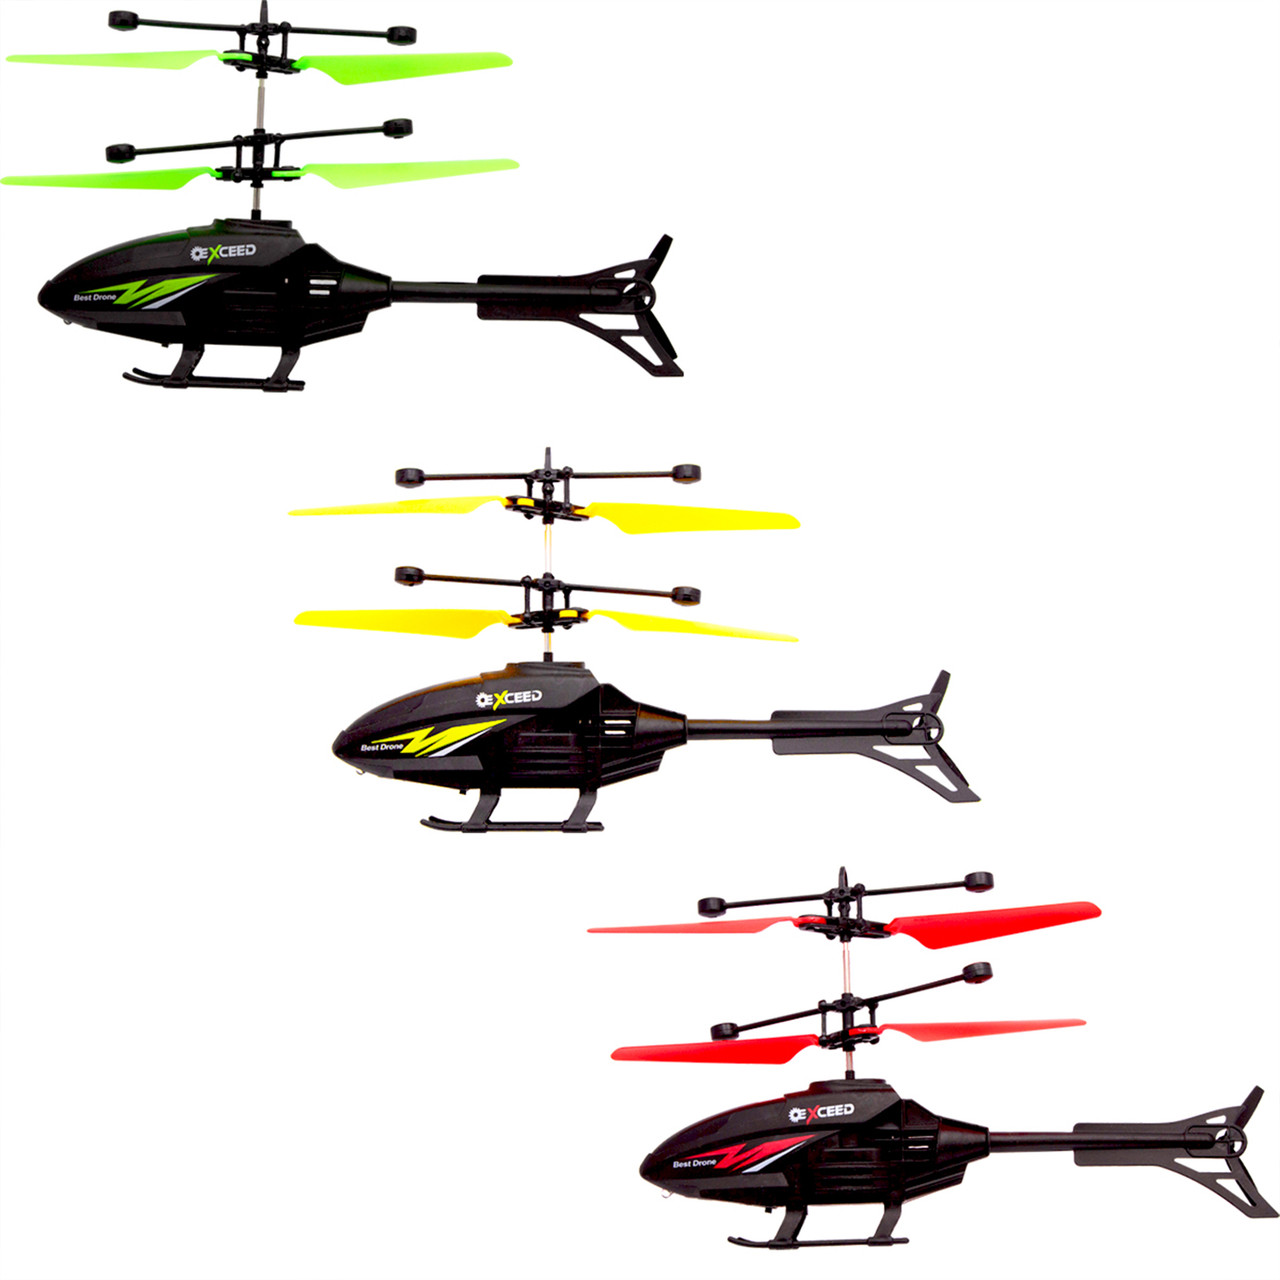 Remote Control Helicopter with Gyro Stabilizer, Infrared and 2 Channels product image